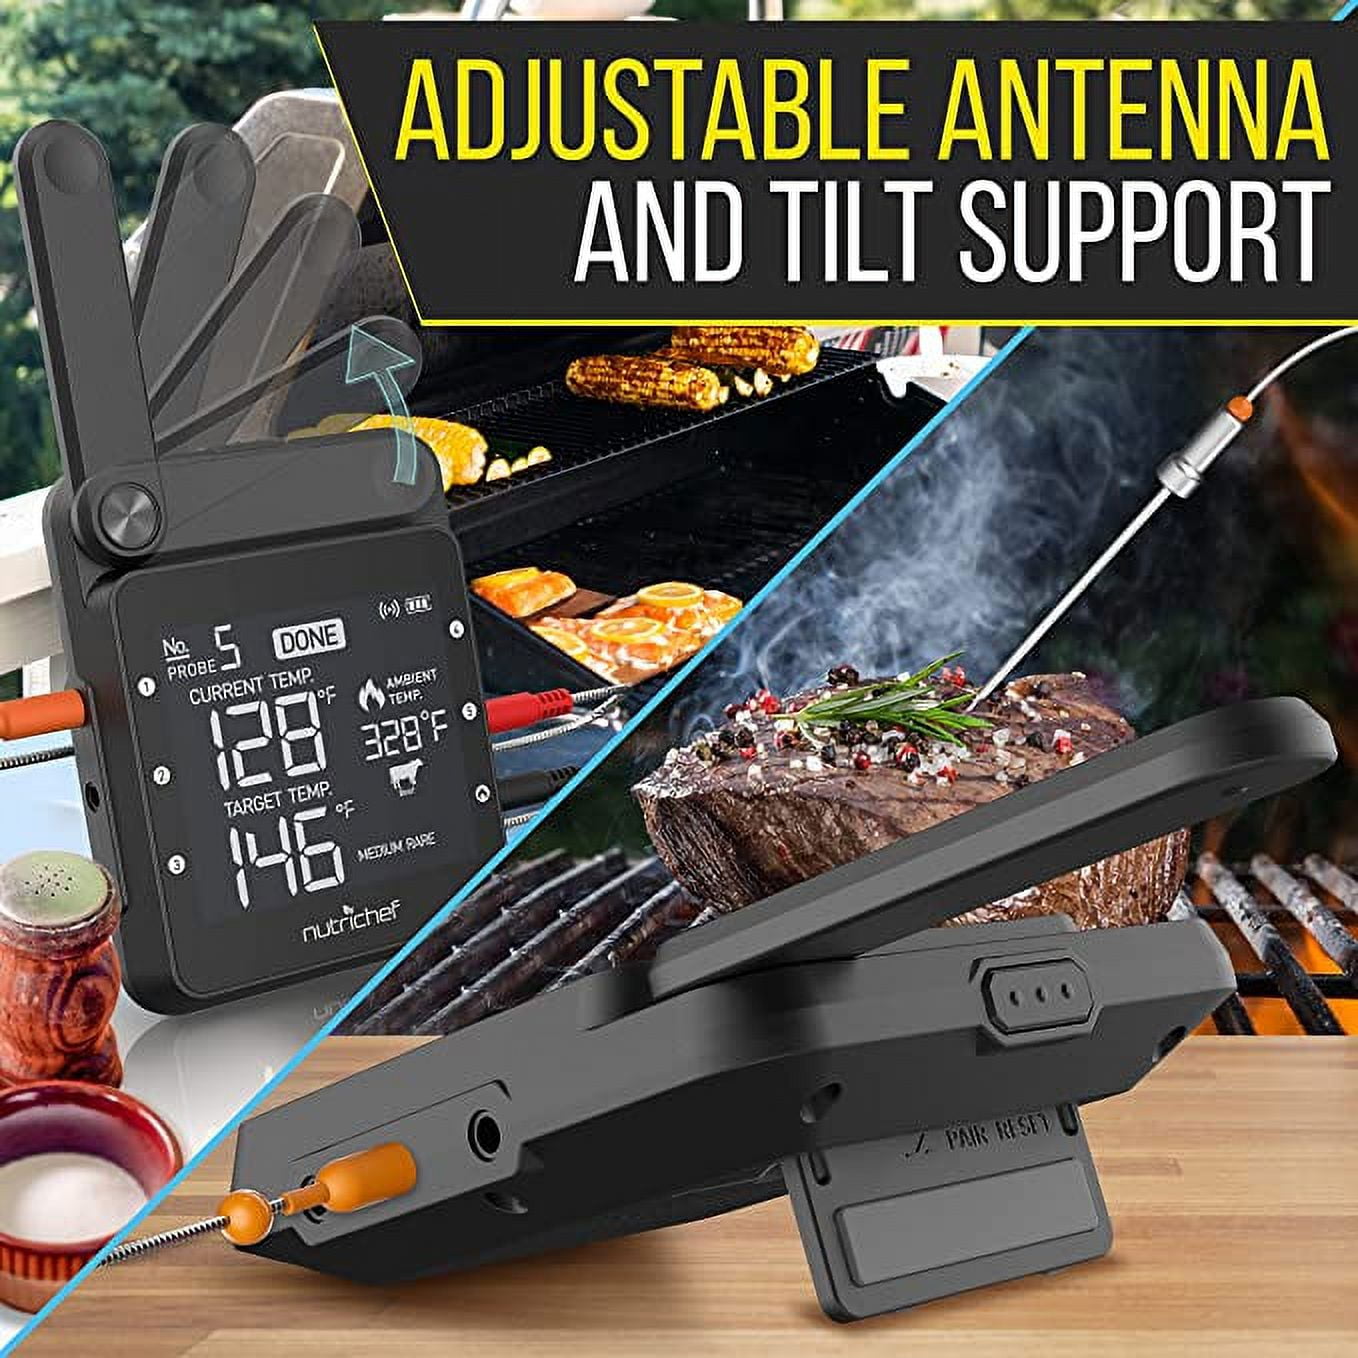 NutriChef PWIRBBQ90 - BBQ Thermometer - Kitchen & Outdoor Wireless Grill  Thermometer with Smartphone App Monitoring 